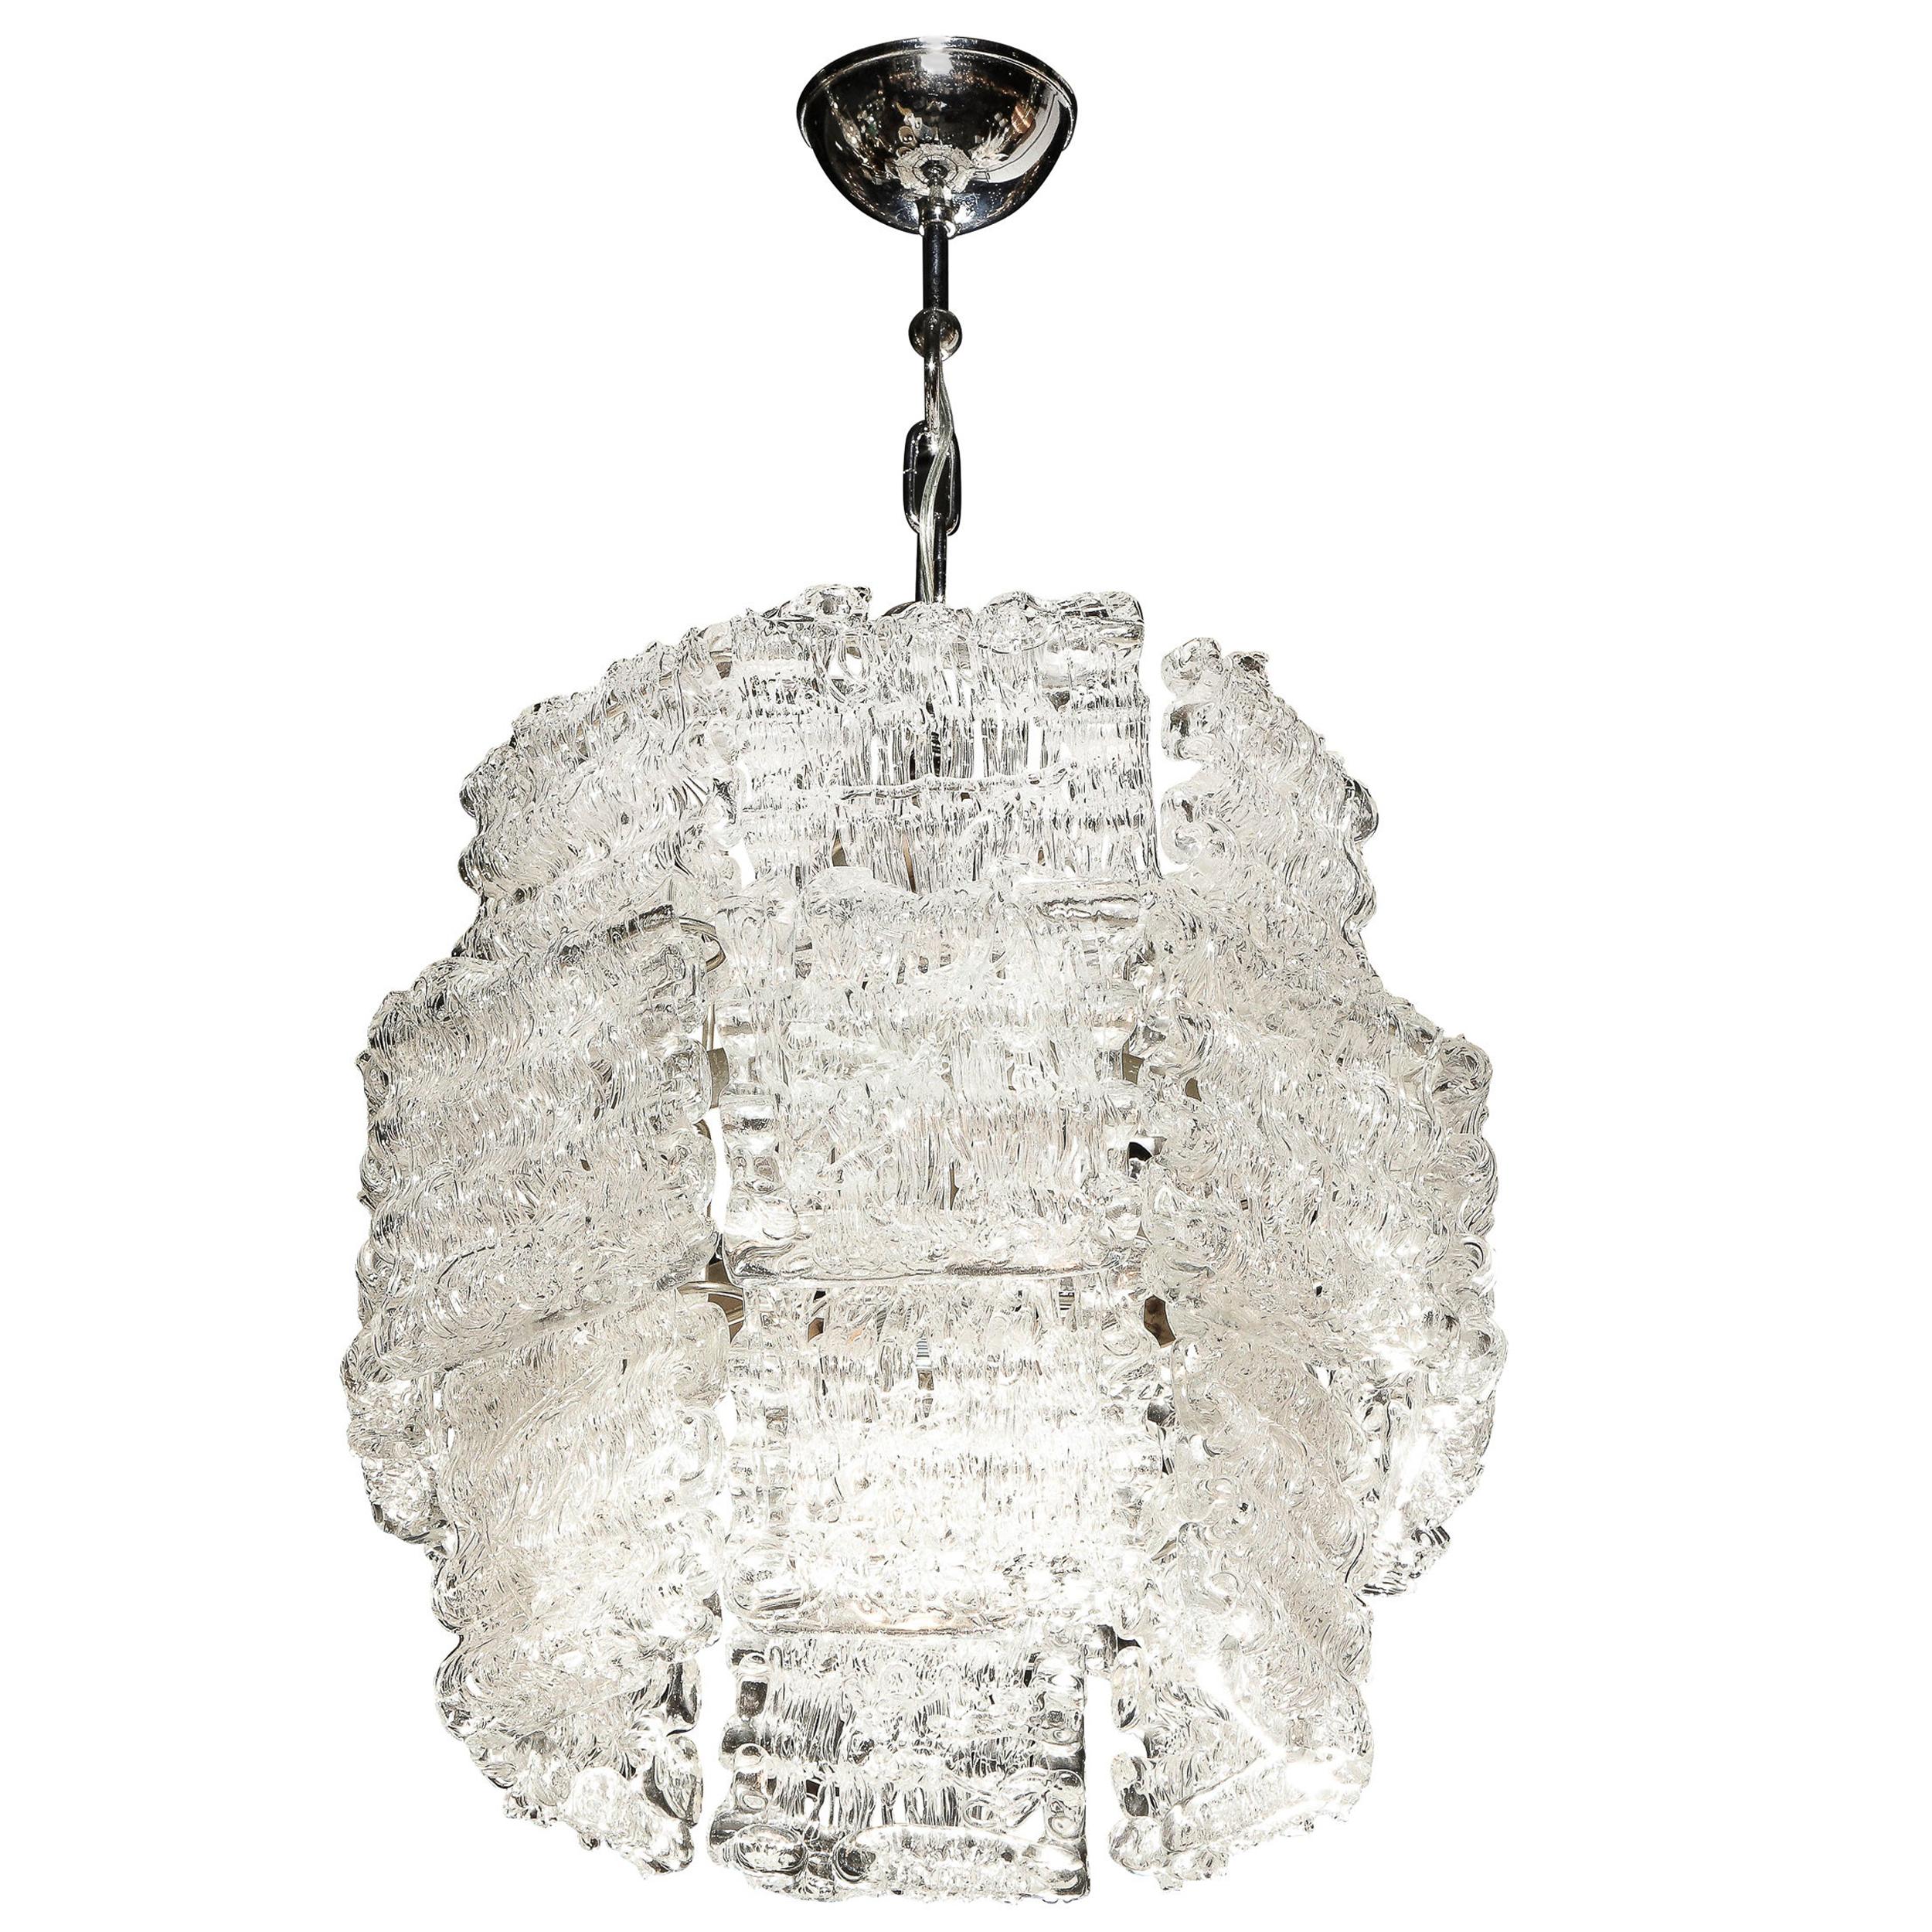 Mid-Century Modern Textured Translucent Glass Chandelier with Chrome Fittings